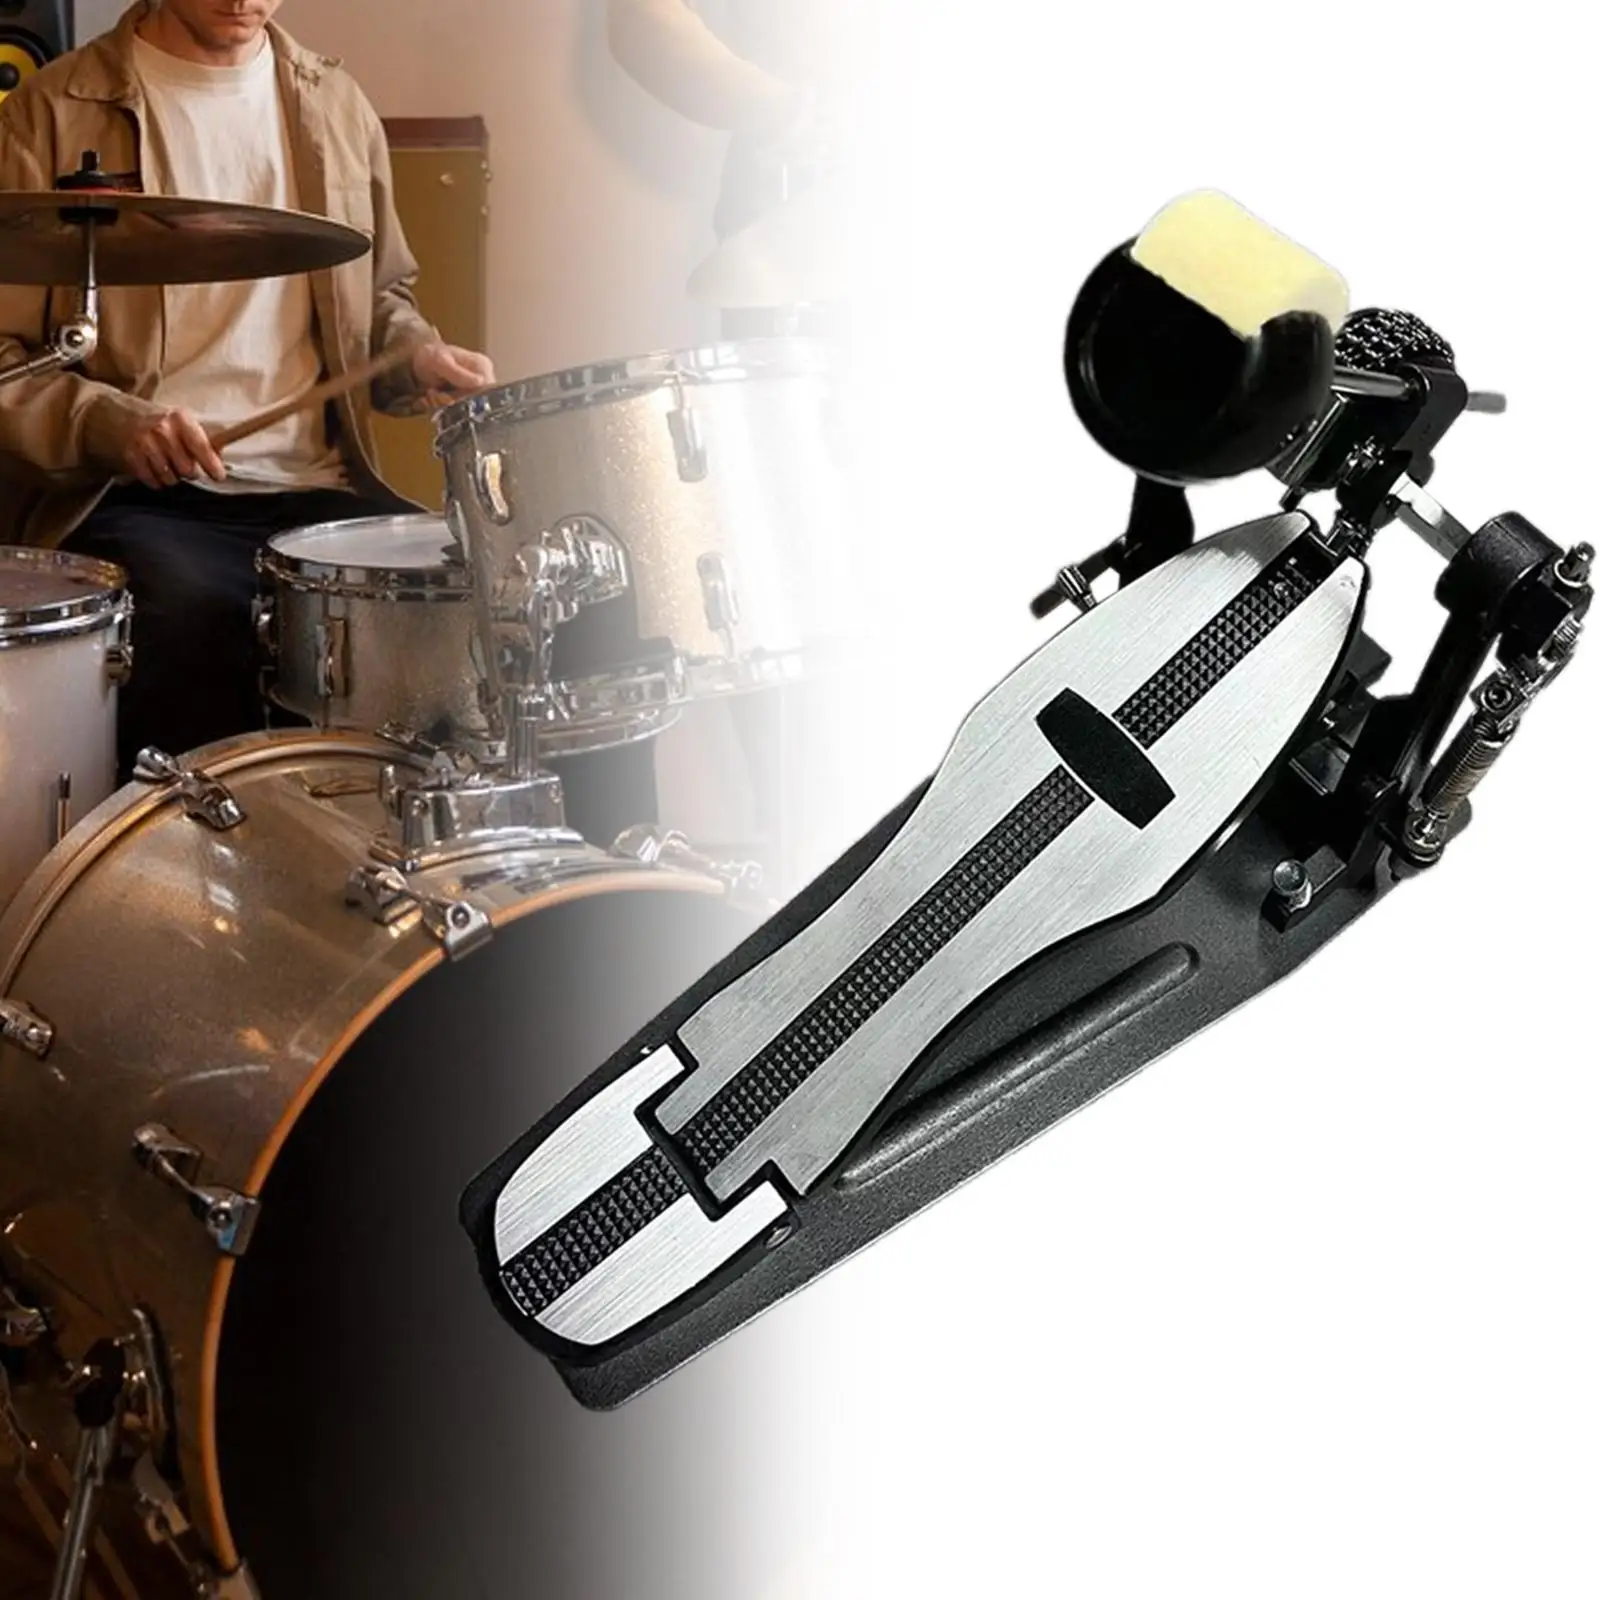 

Single Pedal Hammer Professional Drum Accessories with Beater Stick Drum Practice Pro Drummers Beginner Electronic Drums